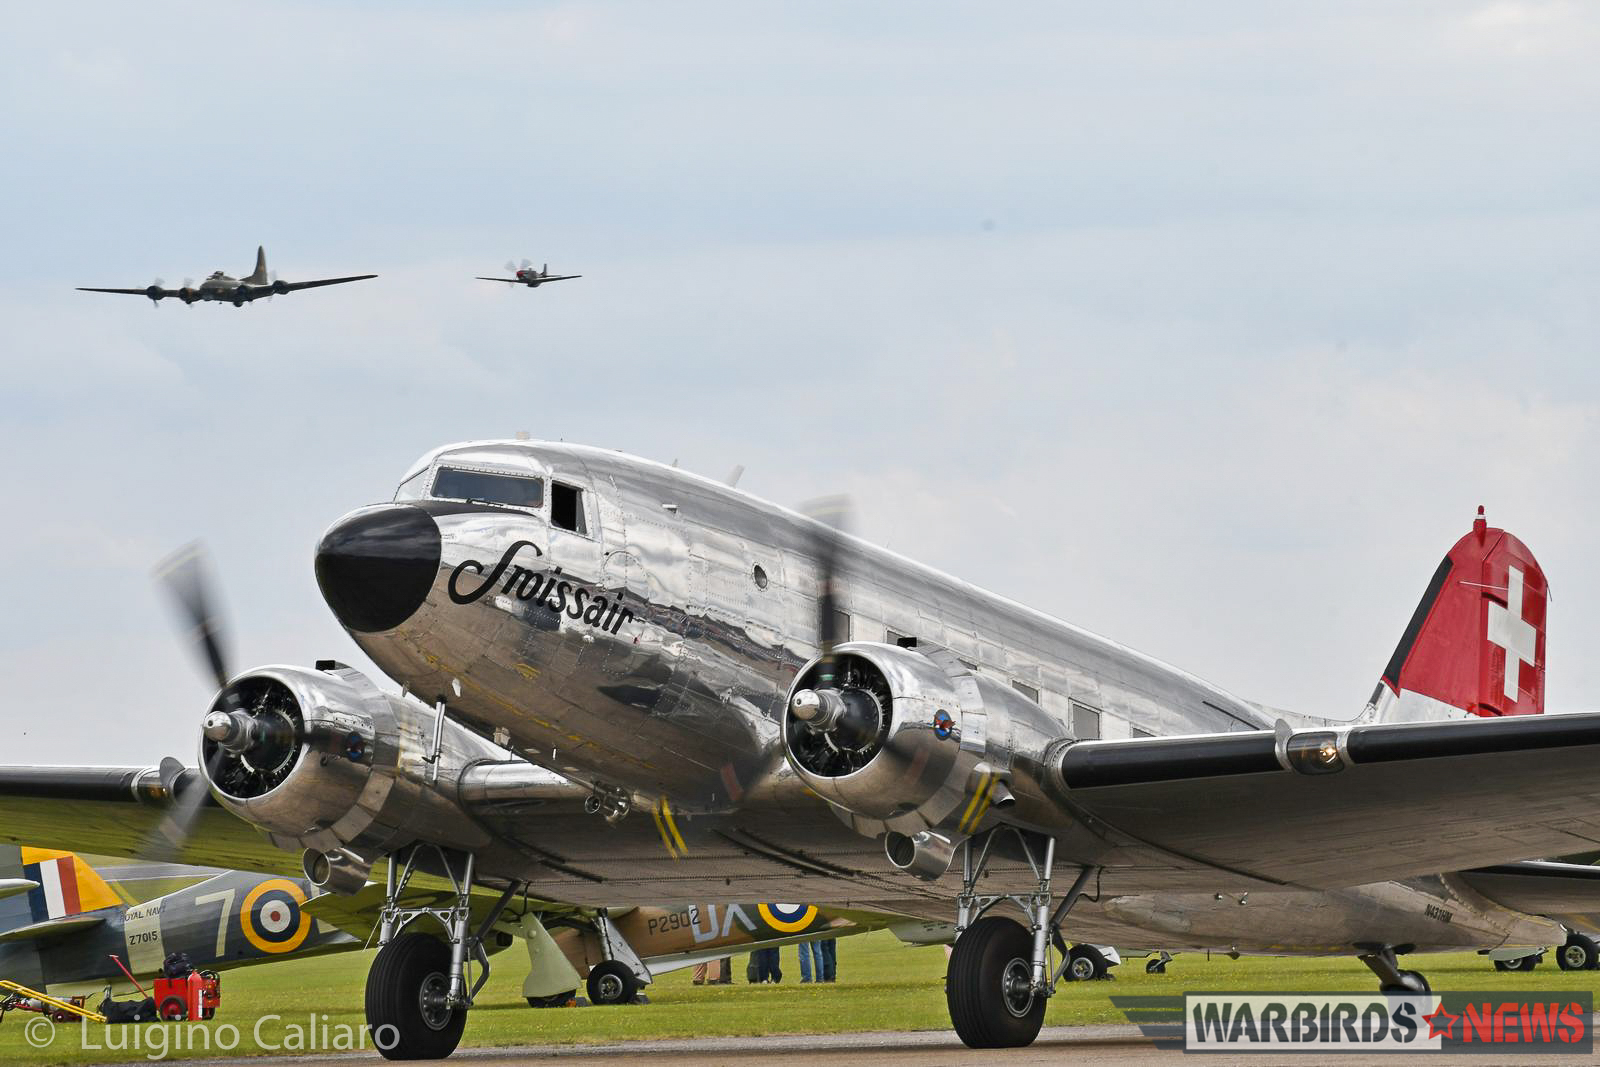 A fabulously maintained Swiss-based DC-3 taxies past a row of Hawker Hurricanes while B-17G 'Sally-B' flies overhead in company of a 'Little Friend'. (photo by Luigino Caliaro)